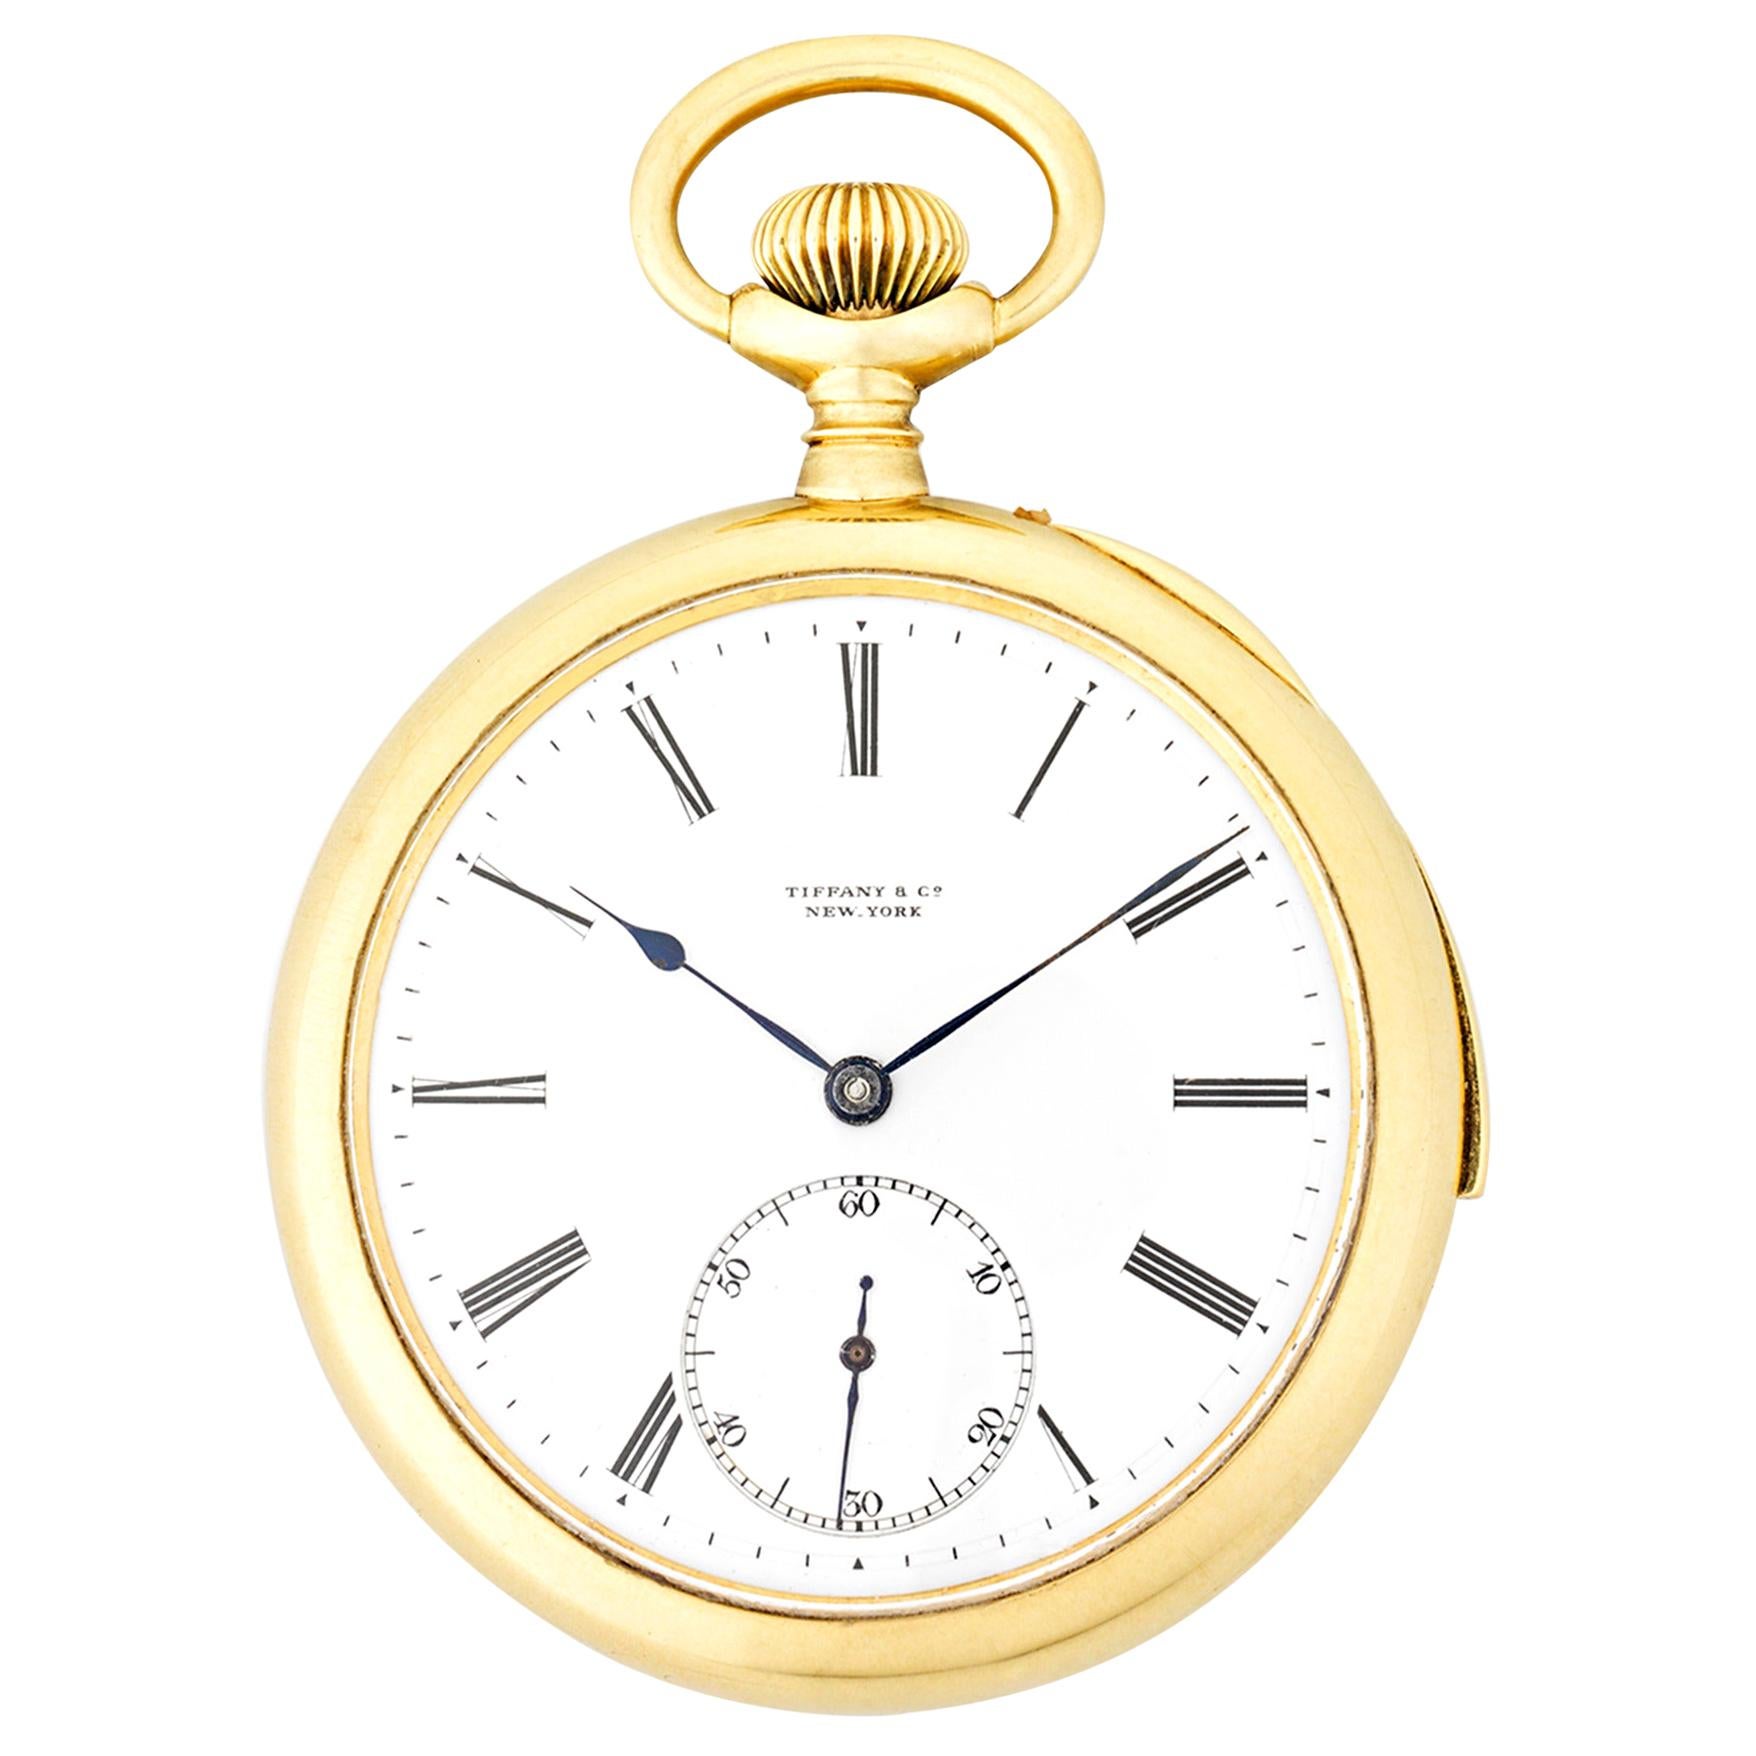 Patek Philippe Minute Repeater Pocket Watch by Tiffany & Co.